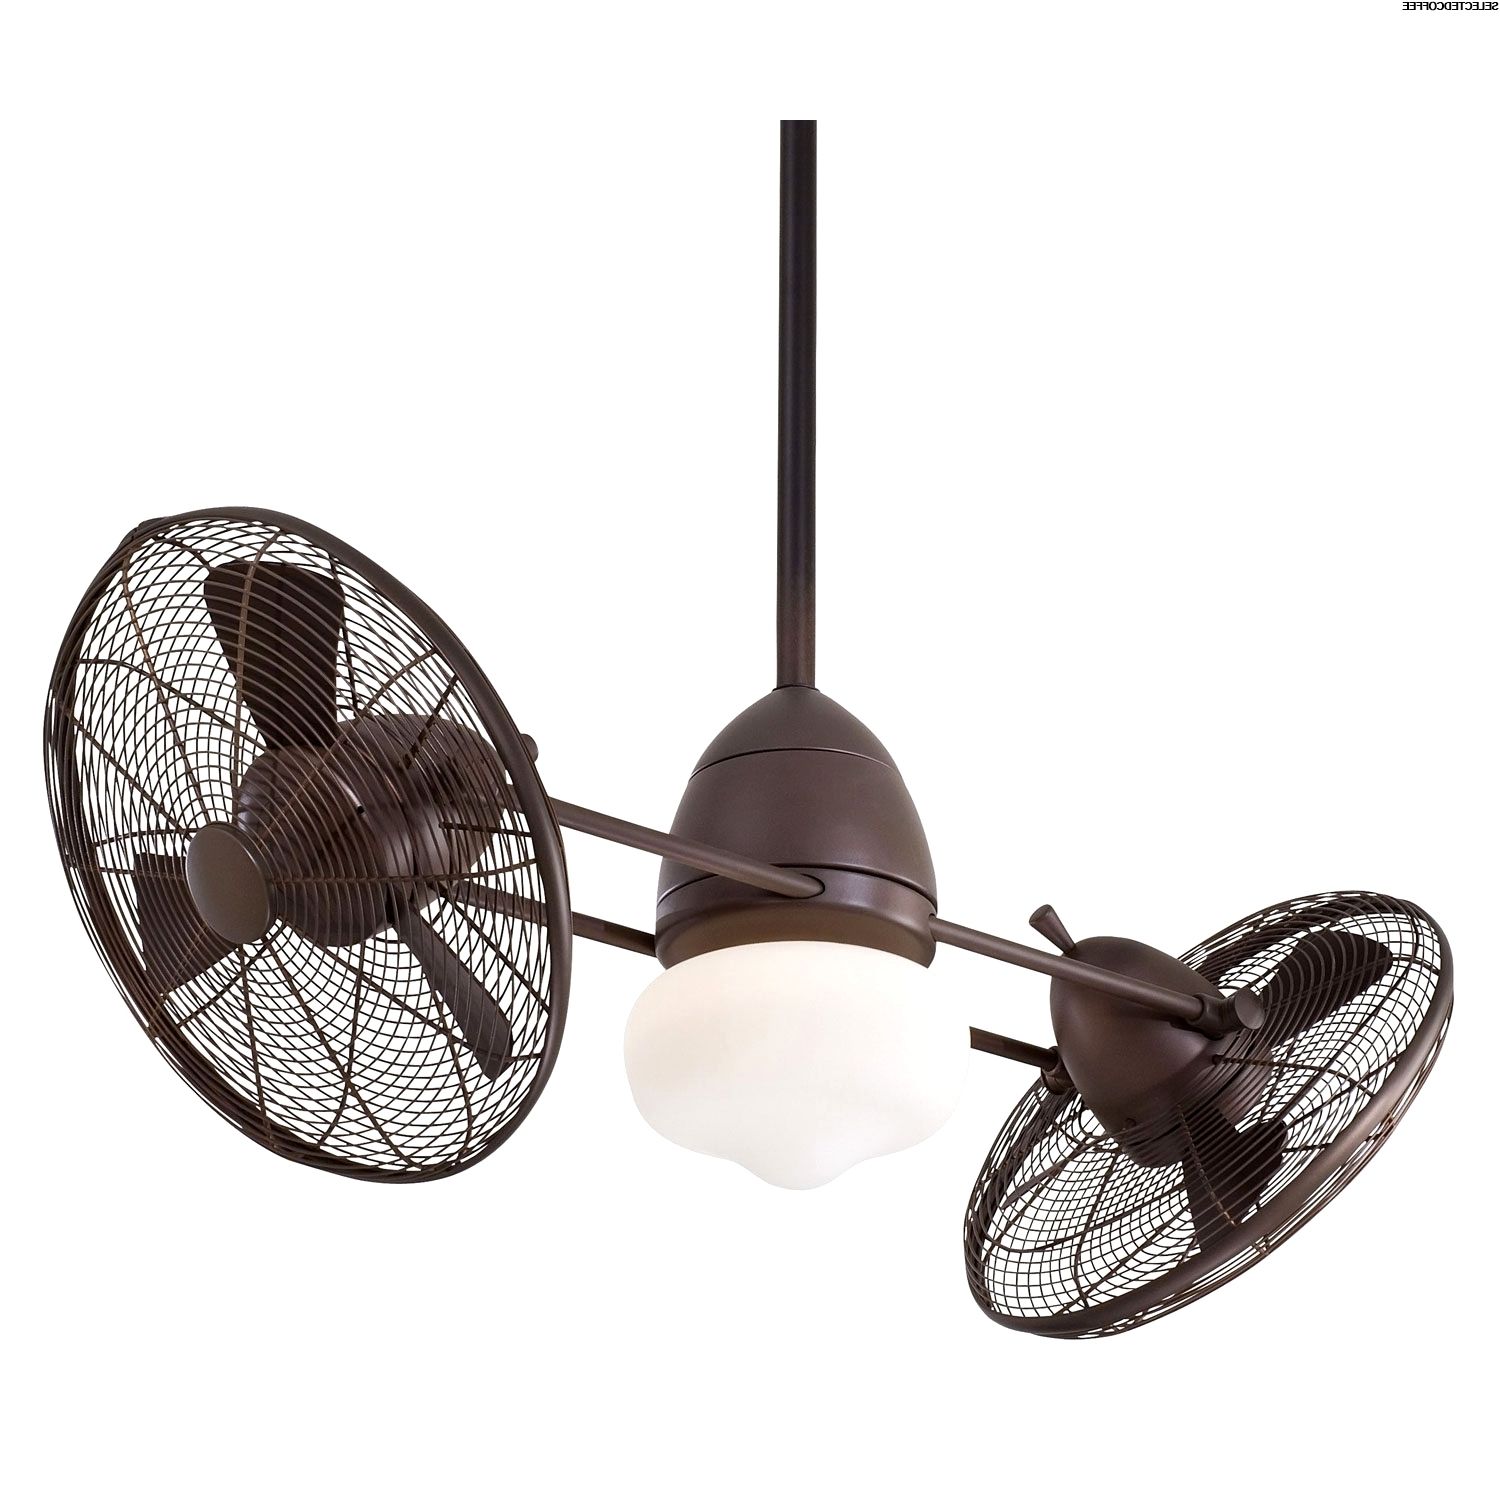 49 Hd Outdoor Fan With Light Gallery Inside Well Known Outdoor Ceiling Fans With Covers (View 15 of 20)